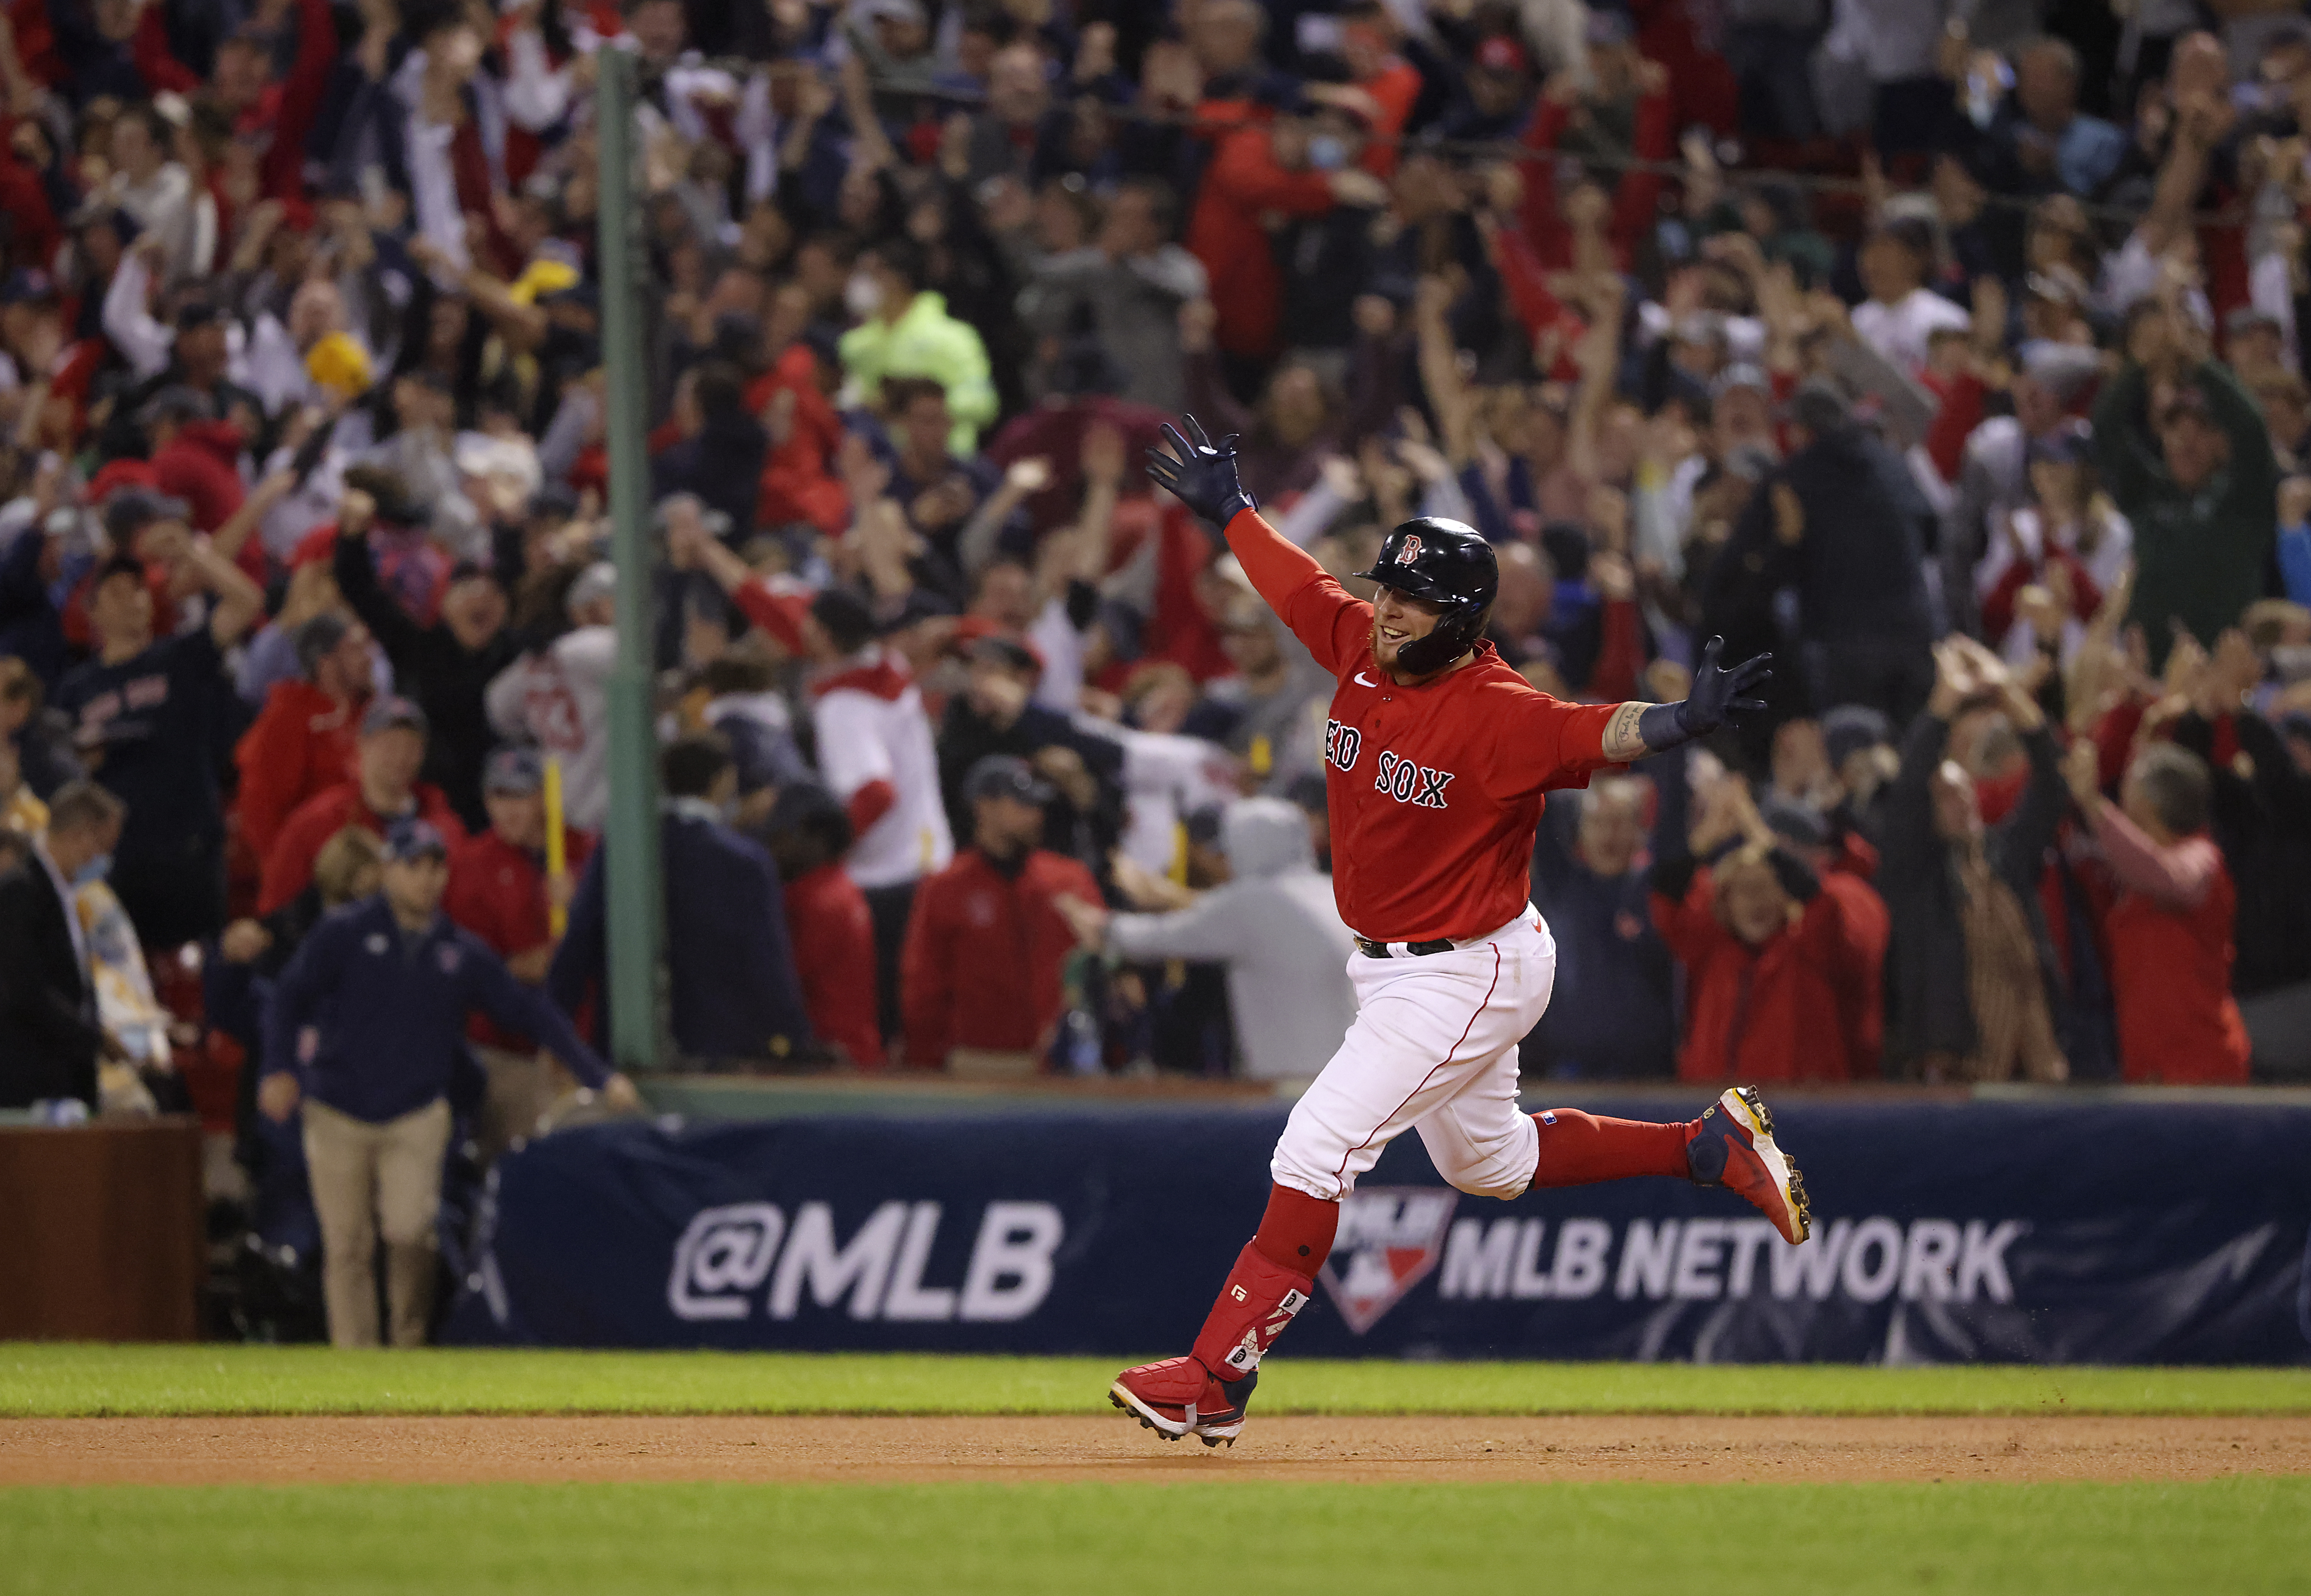 RED SOX WALK IT OFF! Christian Vázquez homers to win Game 3 of the